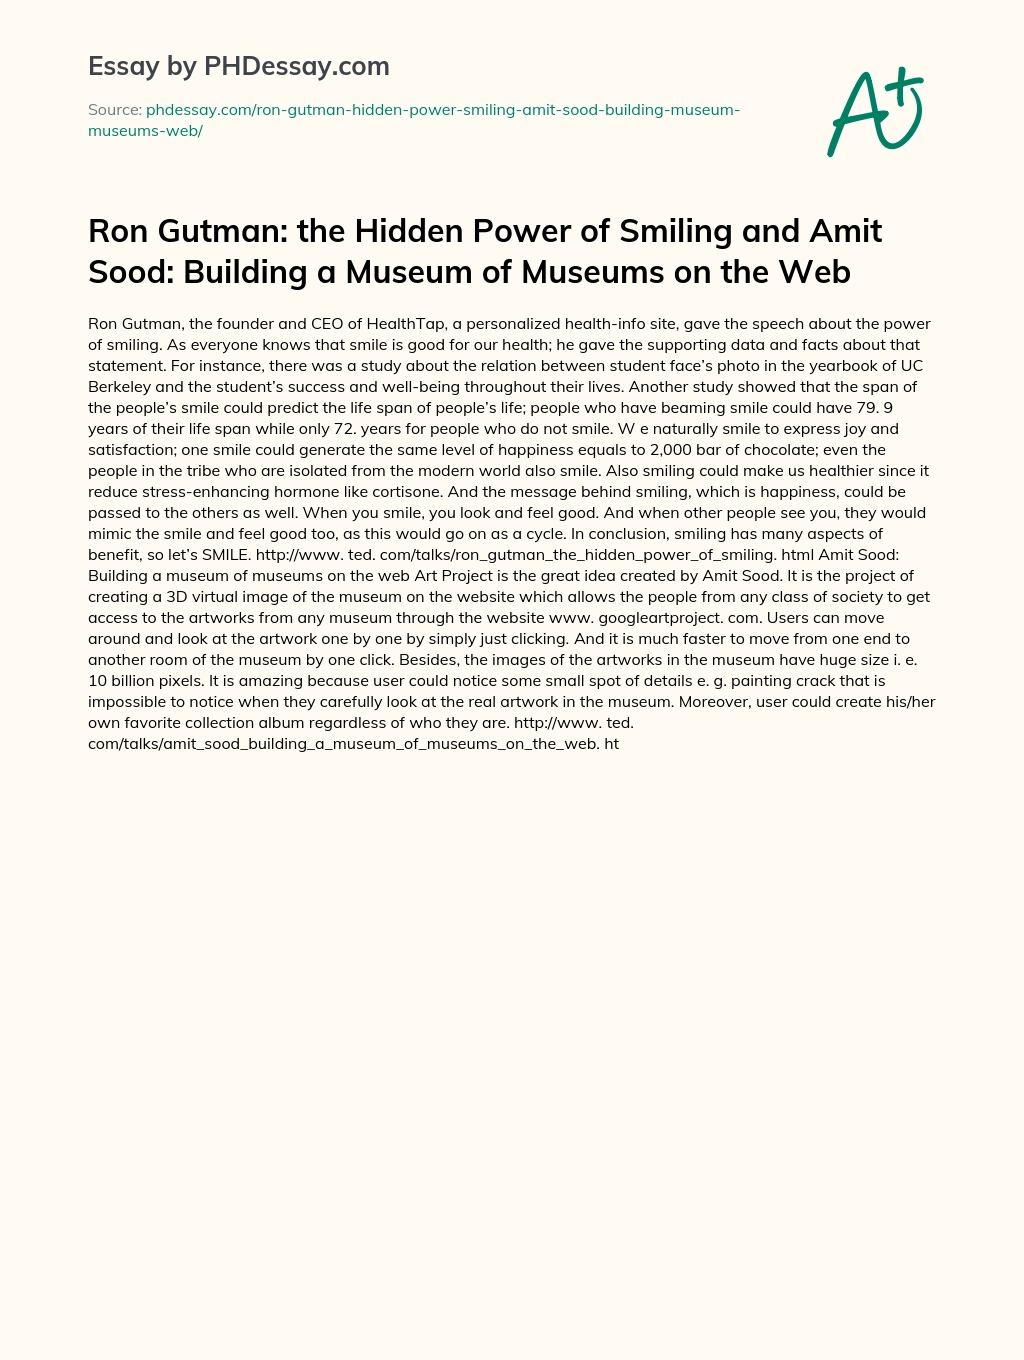 Ron Gutman: the Hidden Power of Smiling and Amit Sood essay